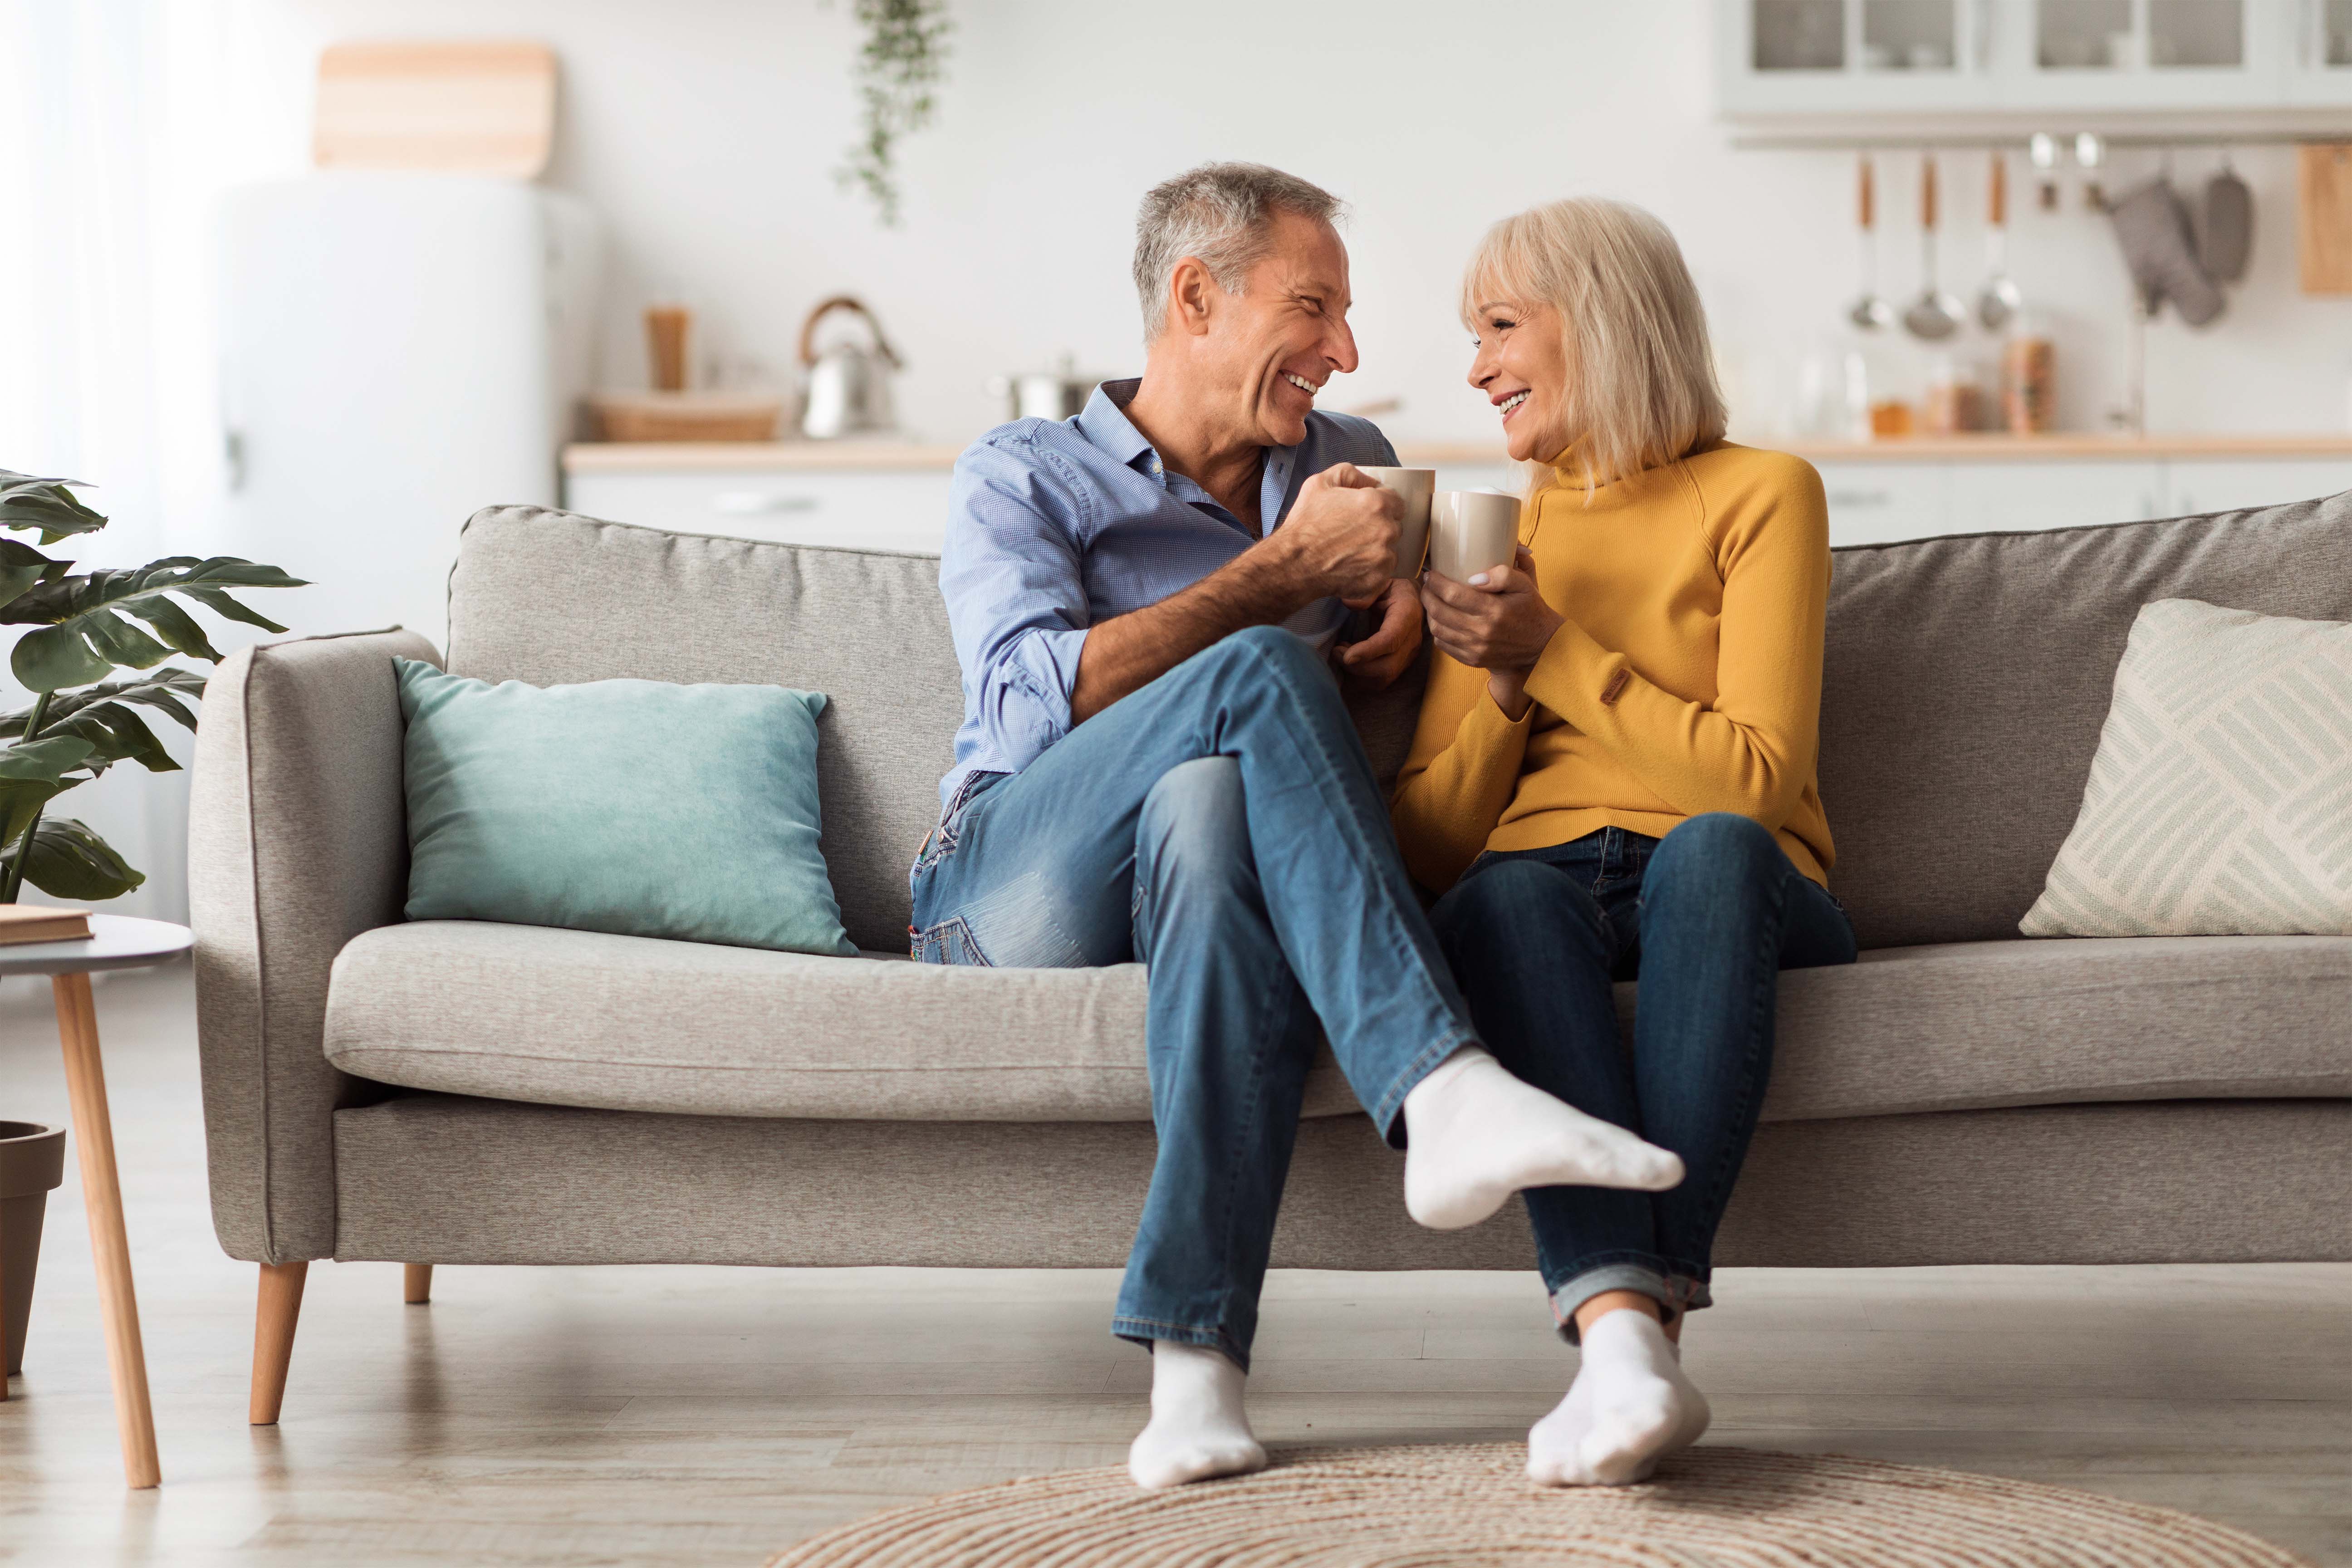 An elderly couple sitting on a couch and enjoying coffee